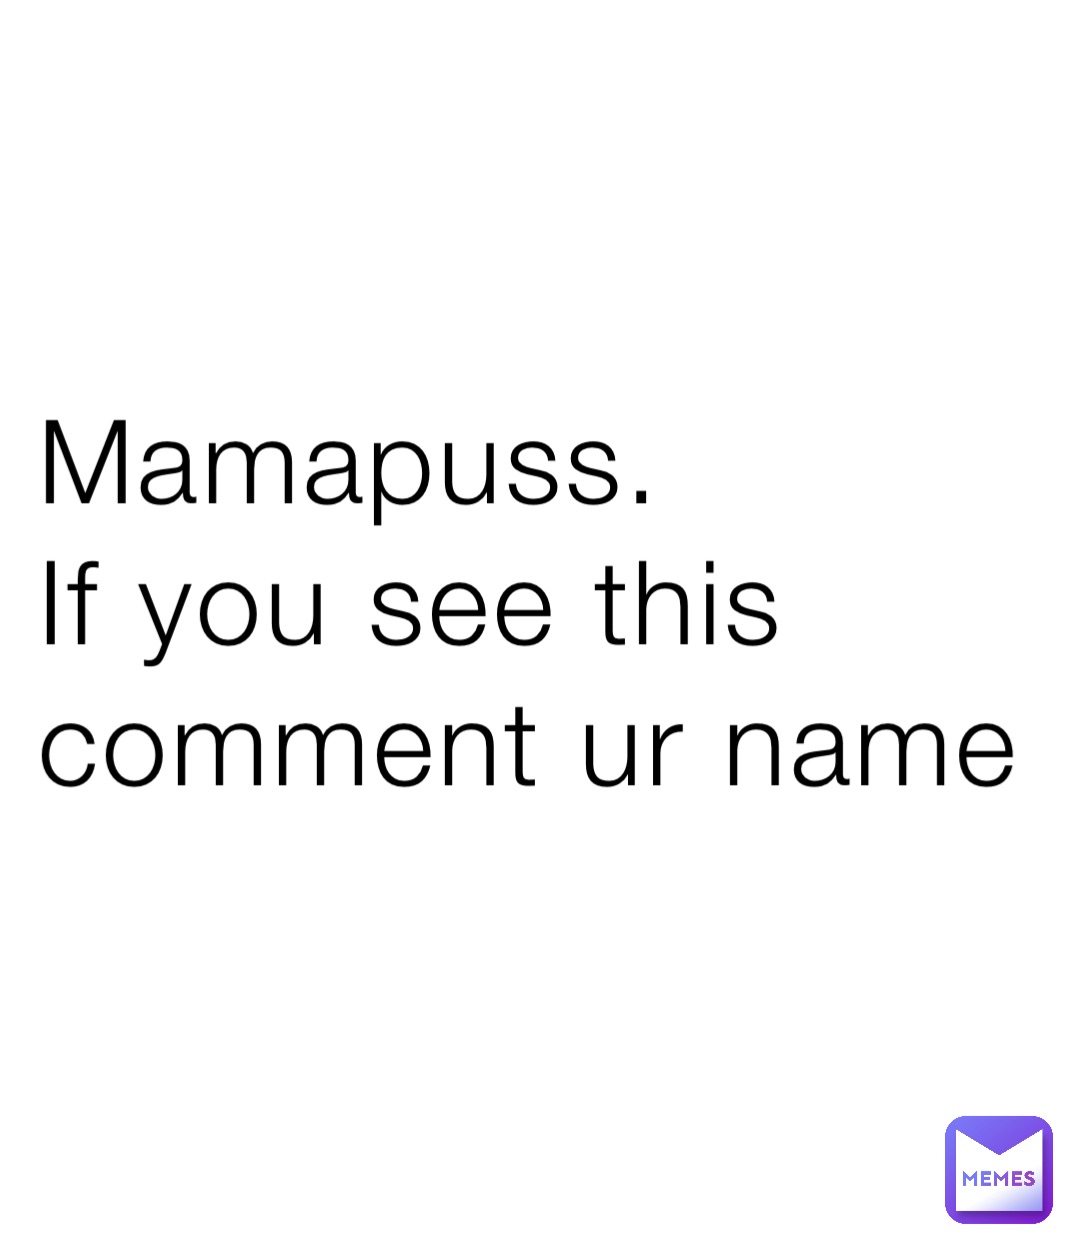 Mamapuss.
If you see this comment ur name